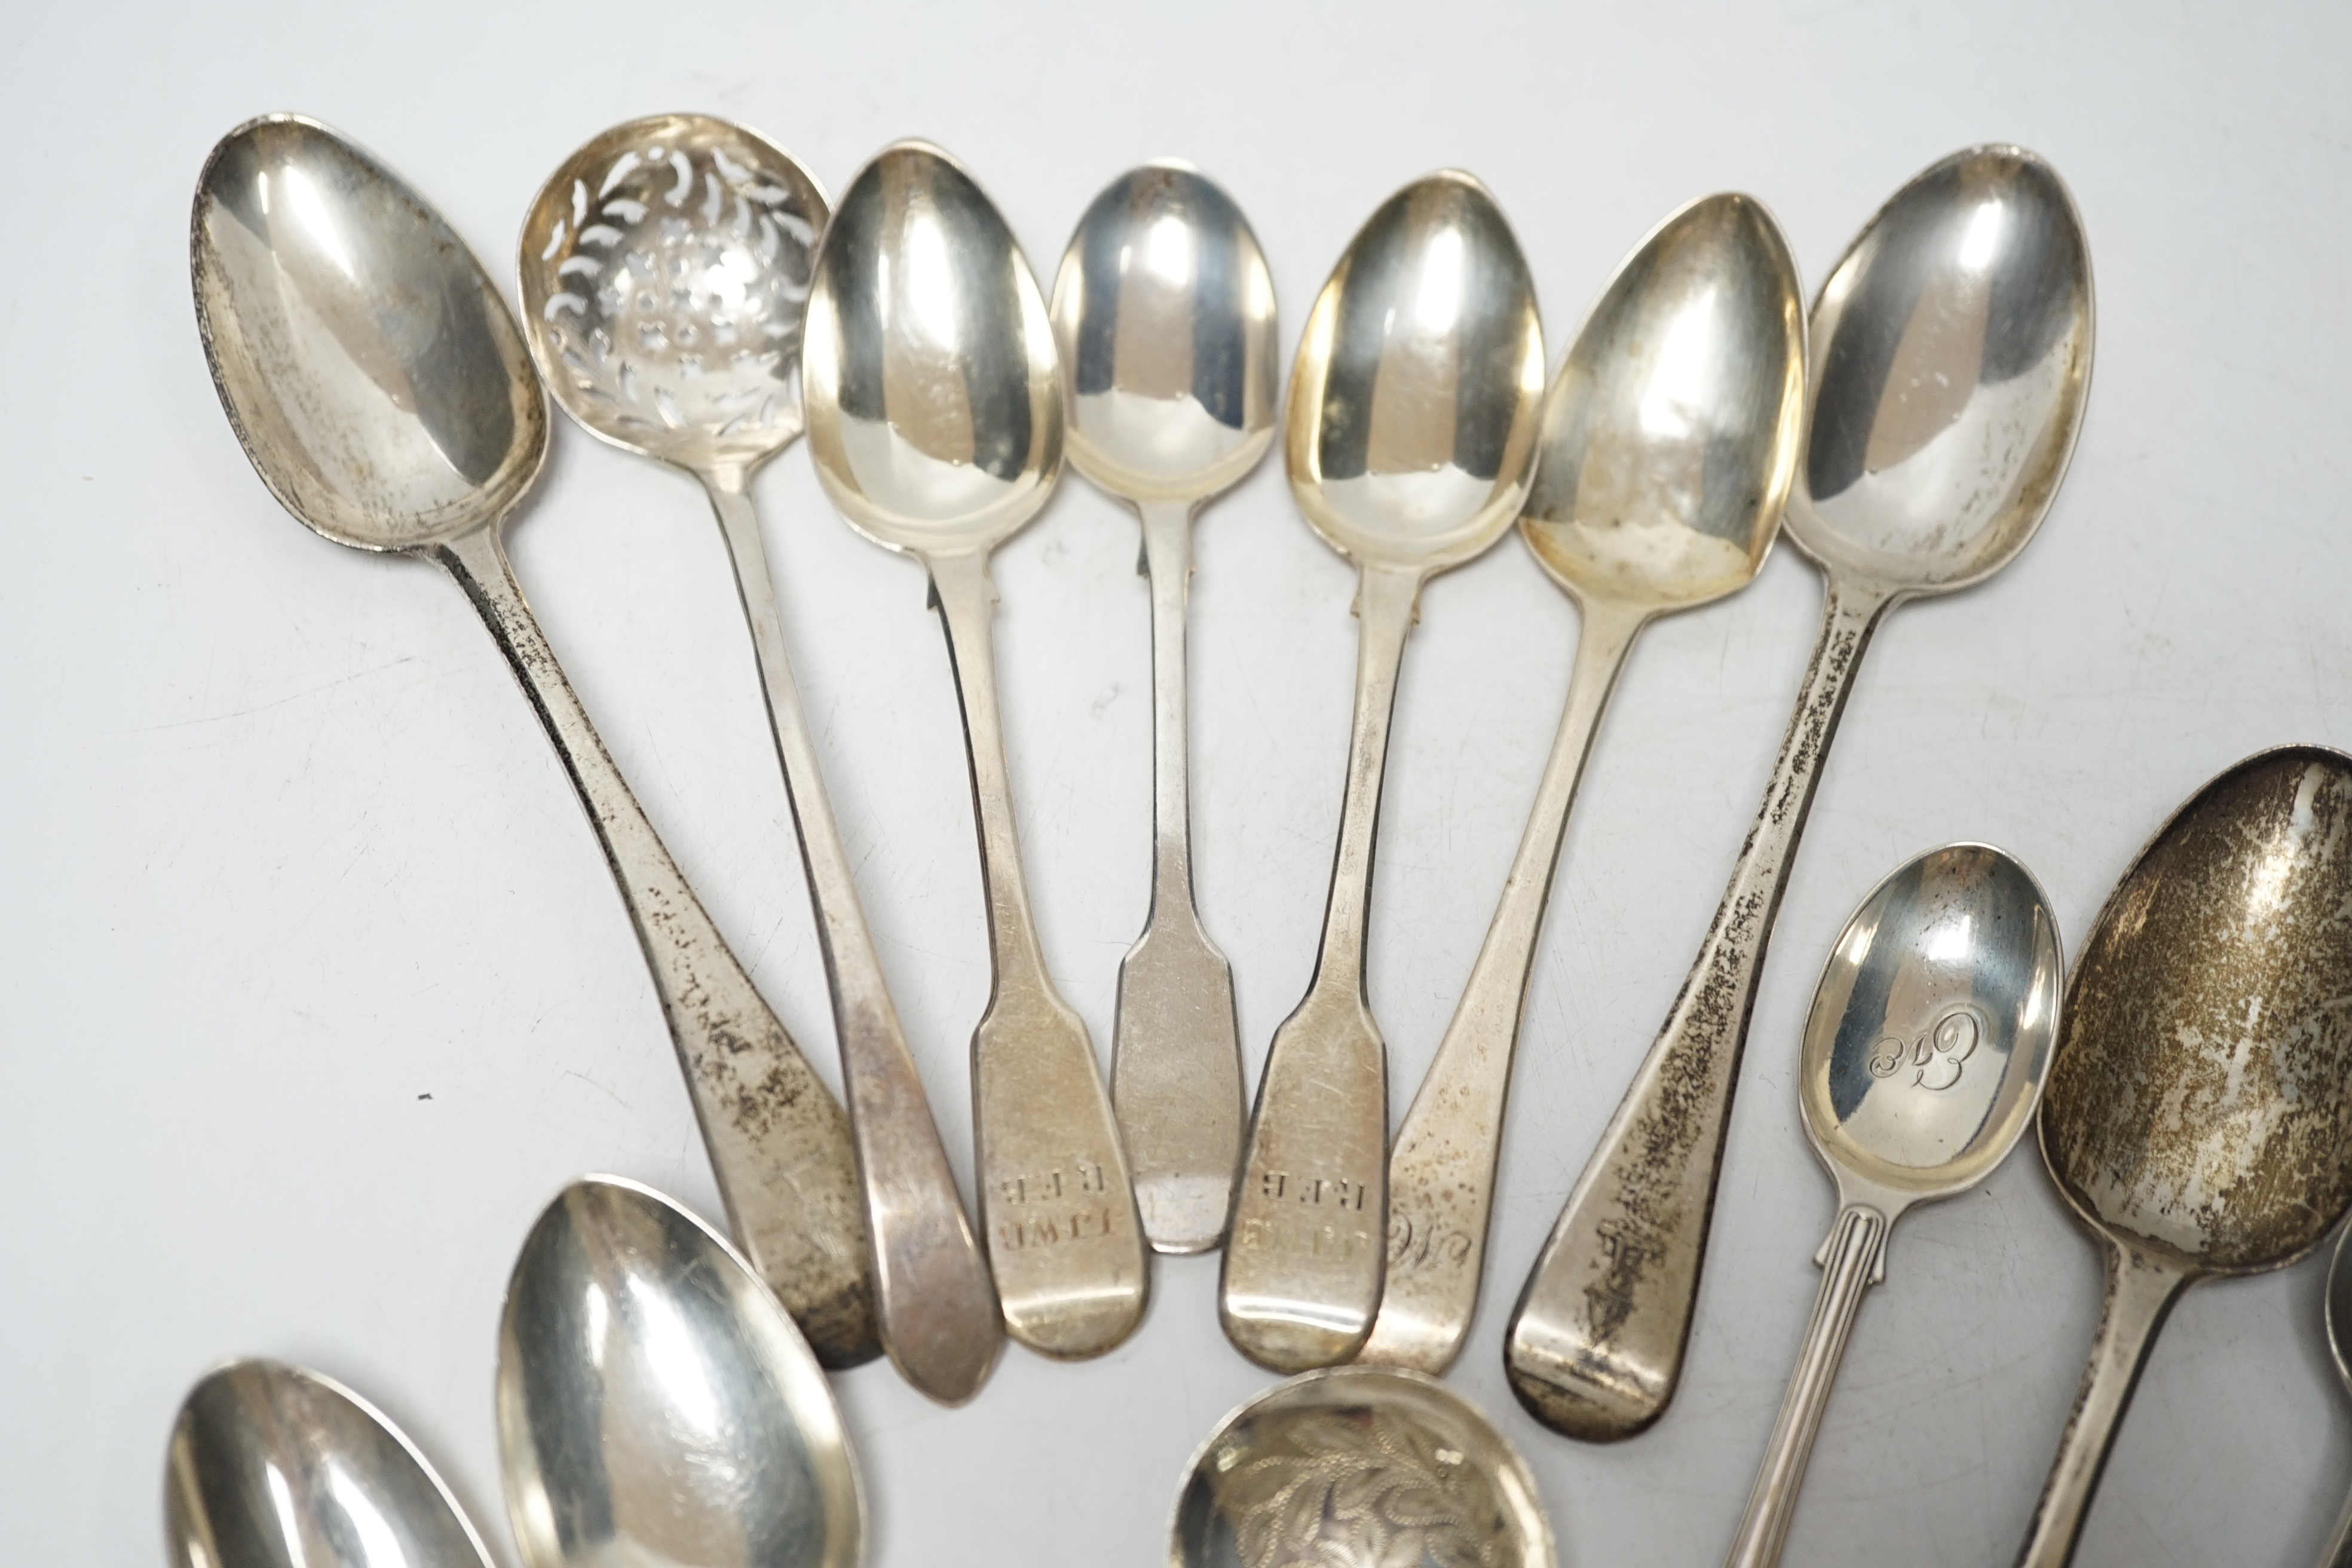 A quantity of assorted 18th century and later flatware, mainly teaspoons including a set of six base mark teaspoons, caddy spoon, etc, 32.7oz and eight plated spoons.